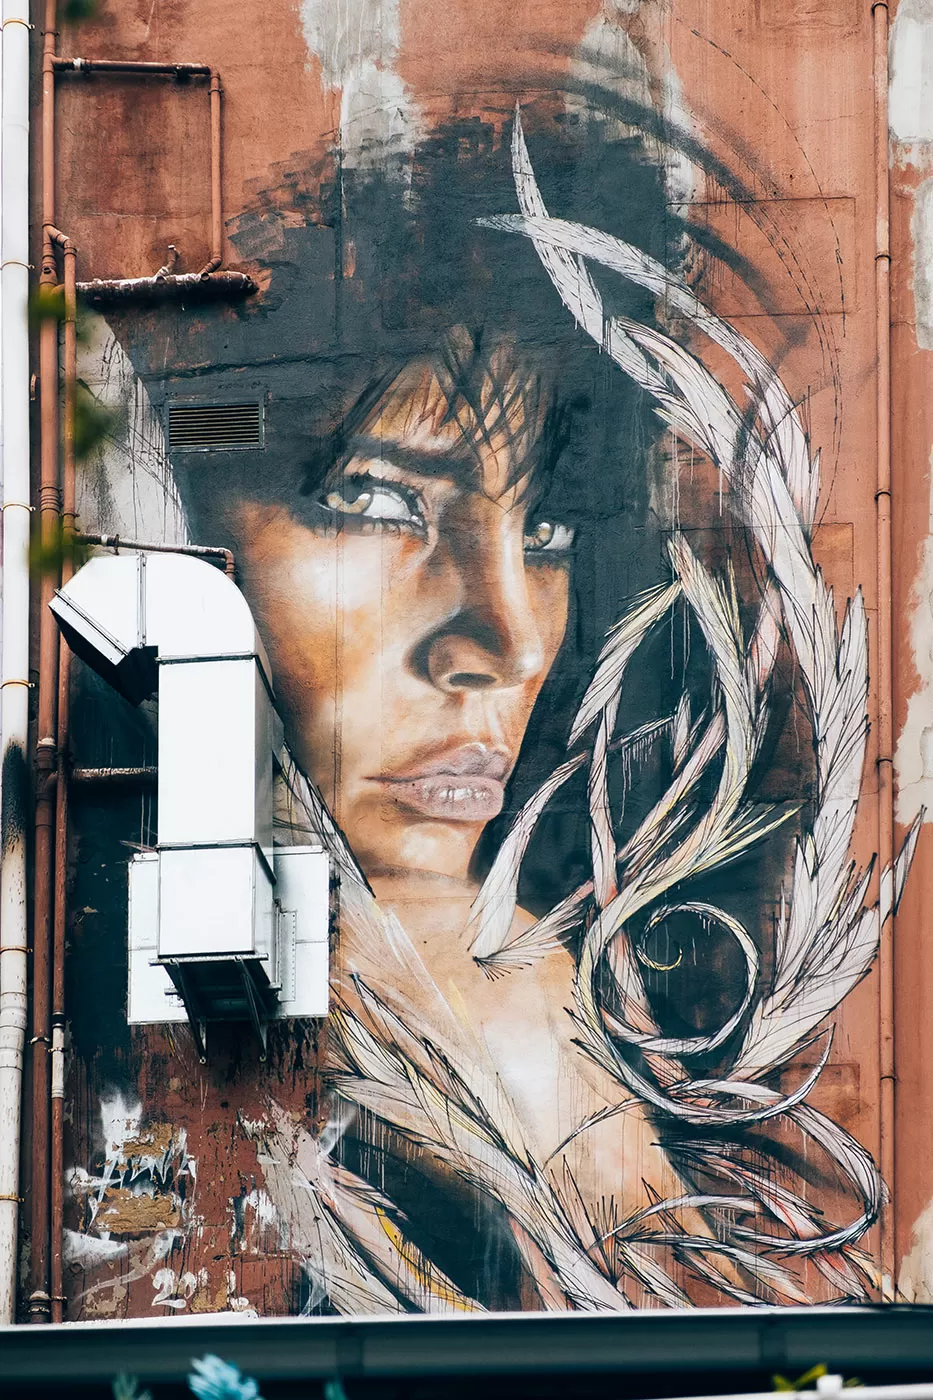 Melbourne Street Art Map - Stevenson Lane - Mural of a girl with feathers by Adnate